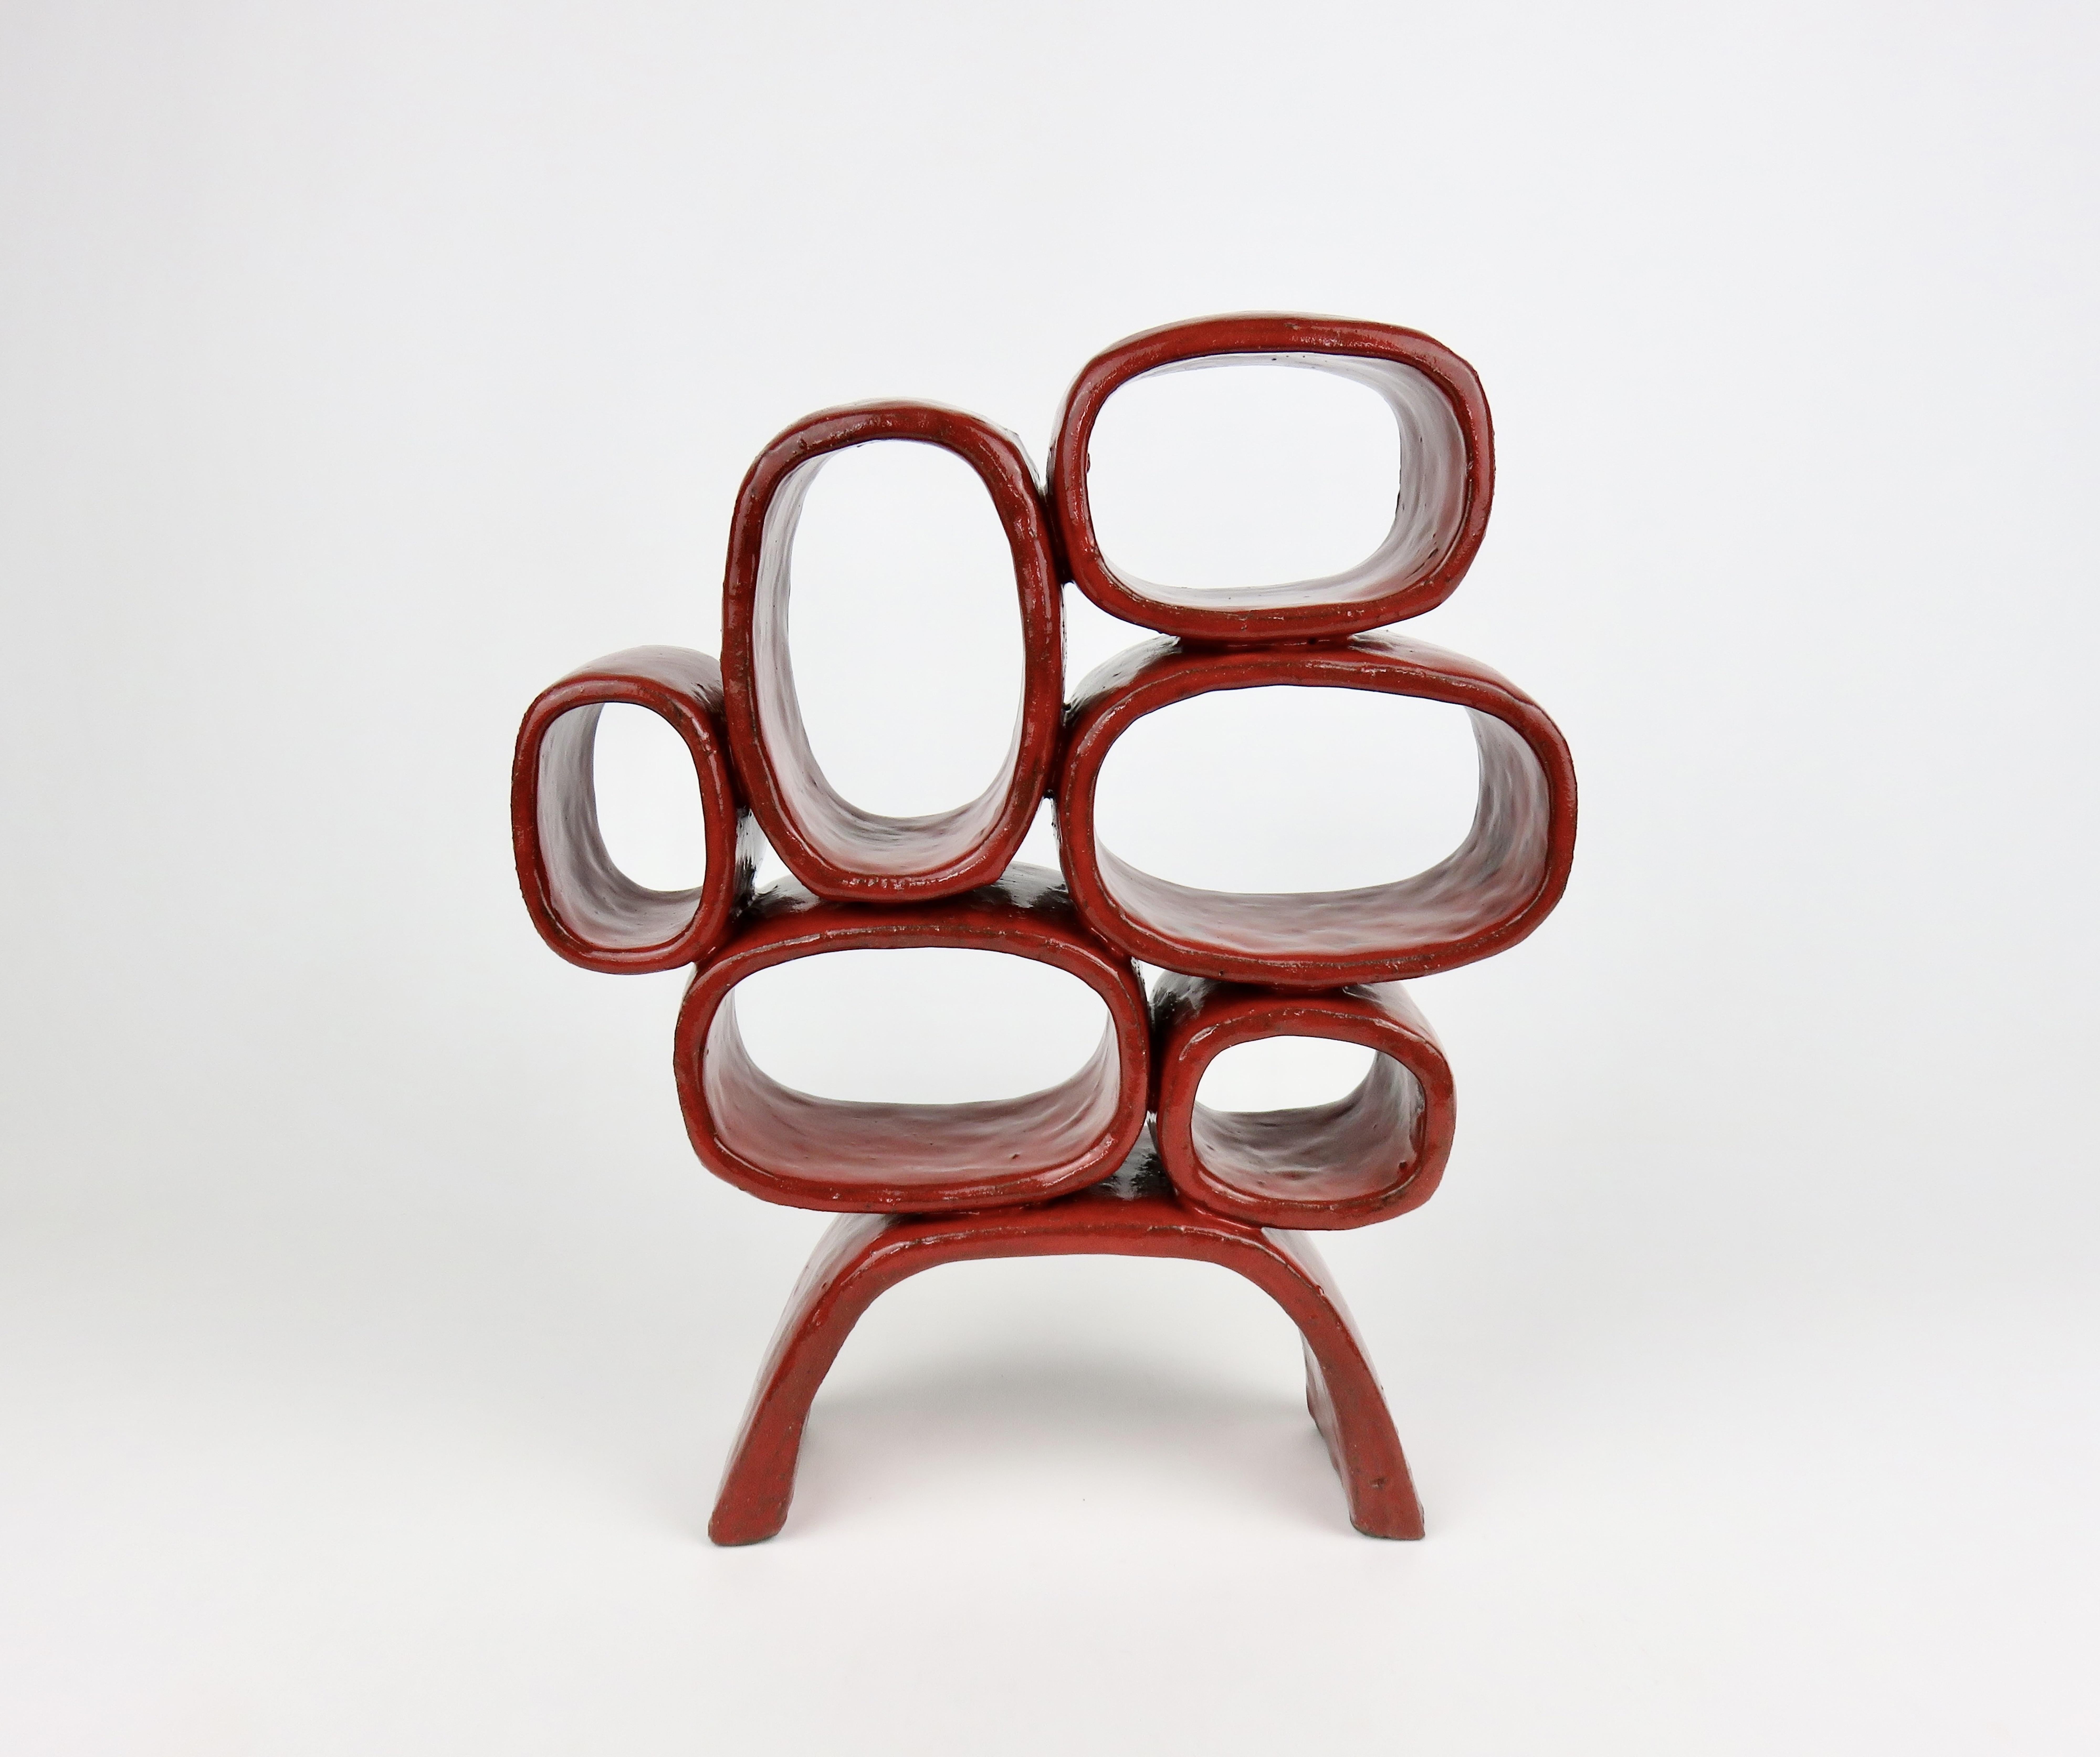 Glazed Bright Red Ceramic Sculpture, Hand Built, Six Soft Rectangles on Angled Legs For Sale